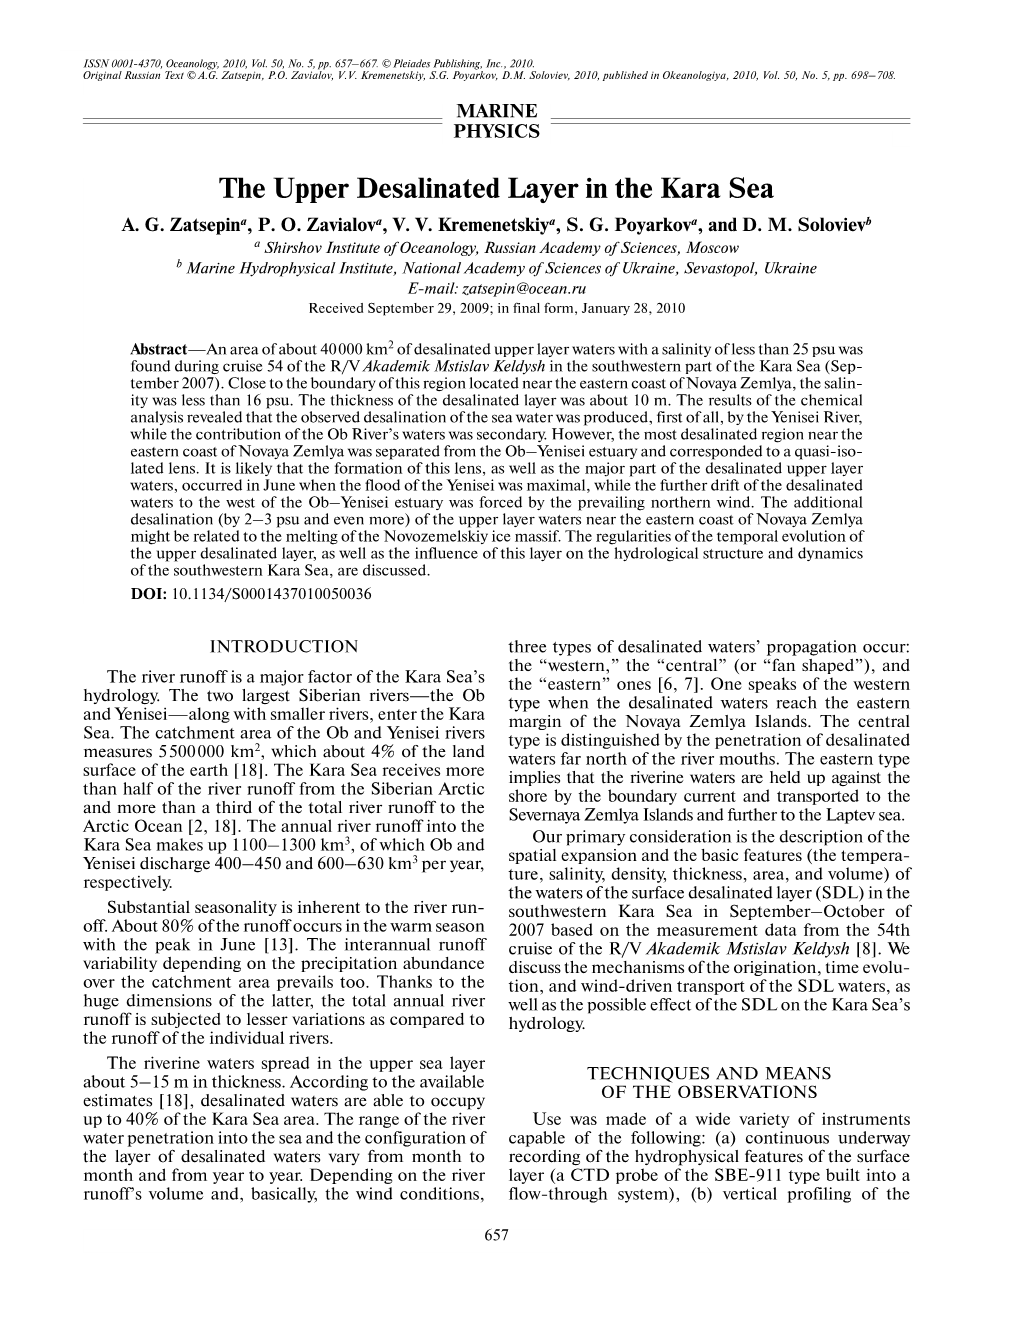 The Upper Desalinated Layer in the Kara Sea A